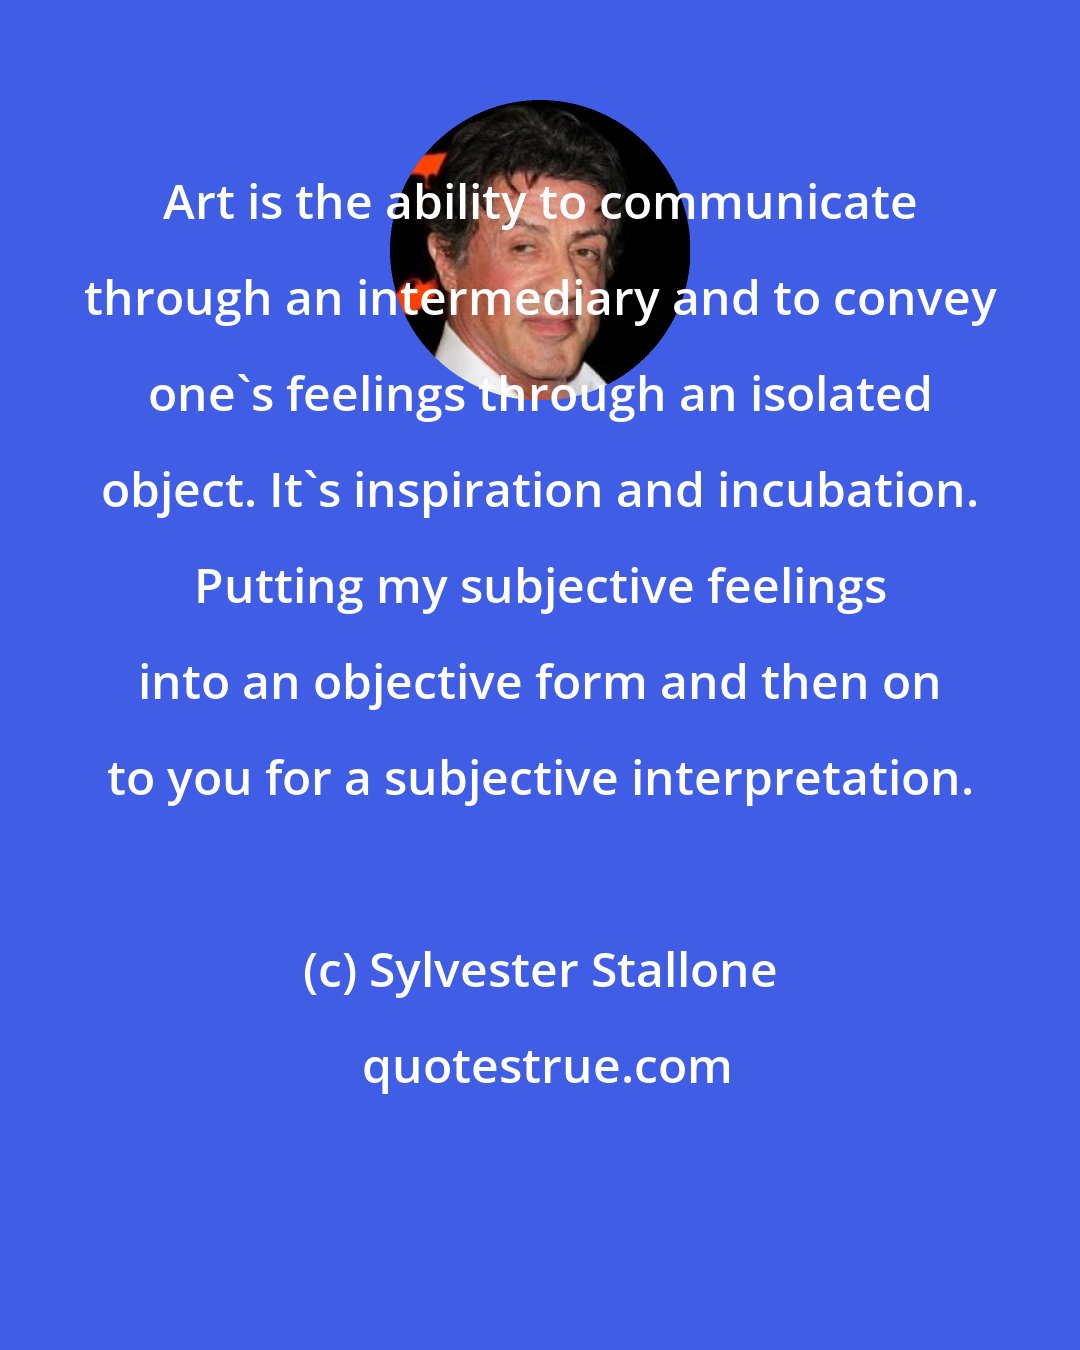 Sylvester Stallone: Art is the ability to communicate through an intermediary and to convey one's feelings through an isolated object. It's inspiration and incubation. Putting my subjective feelings into an objective form and then on to you for a subjective interpretation.